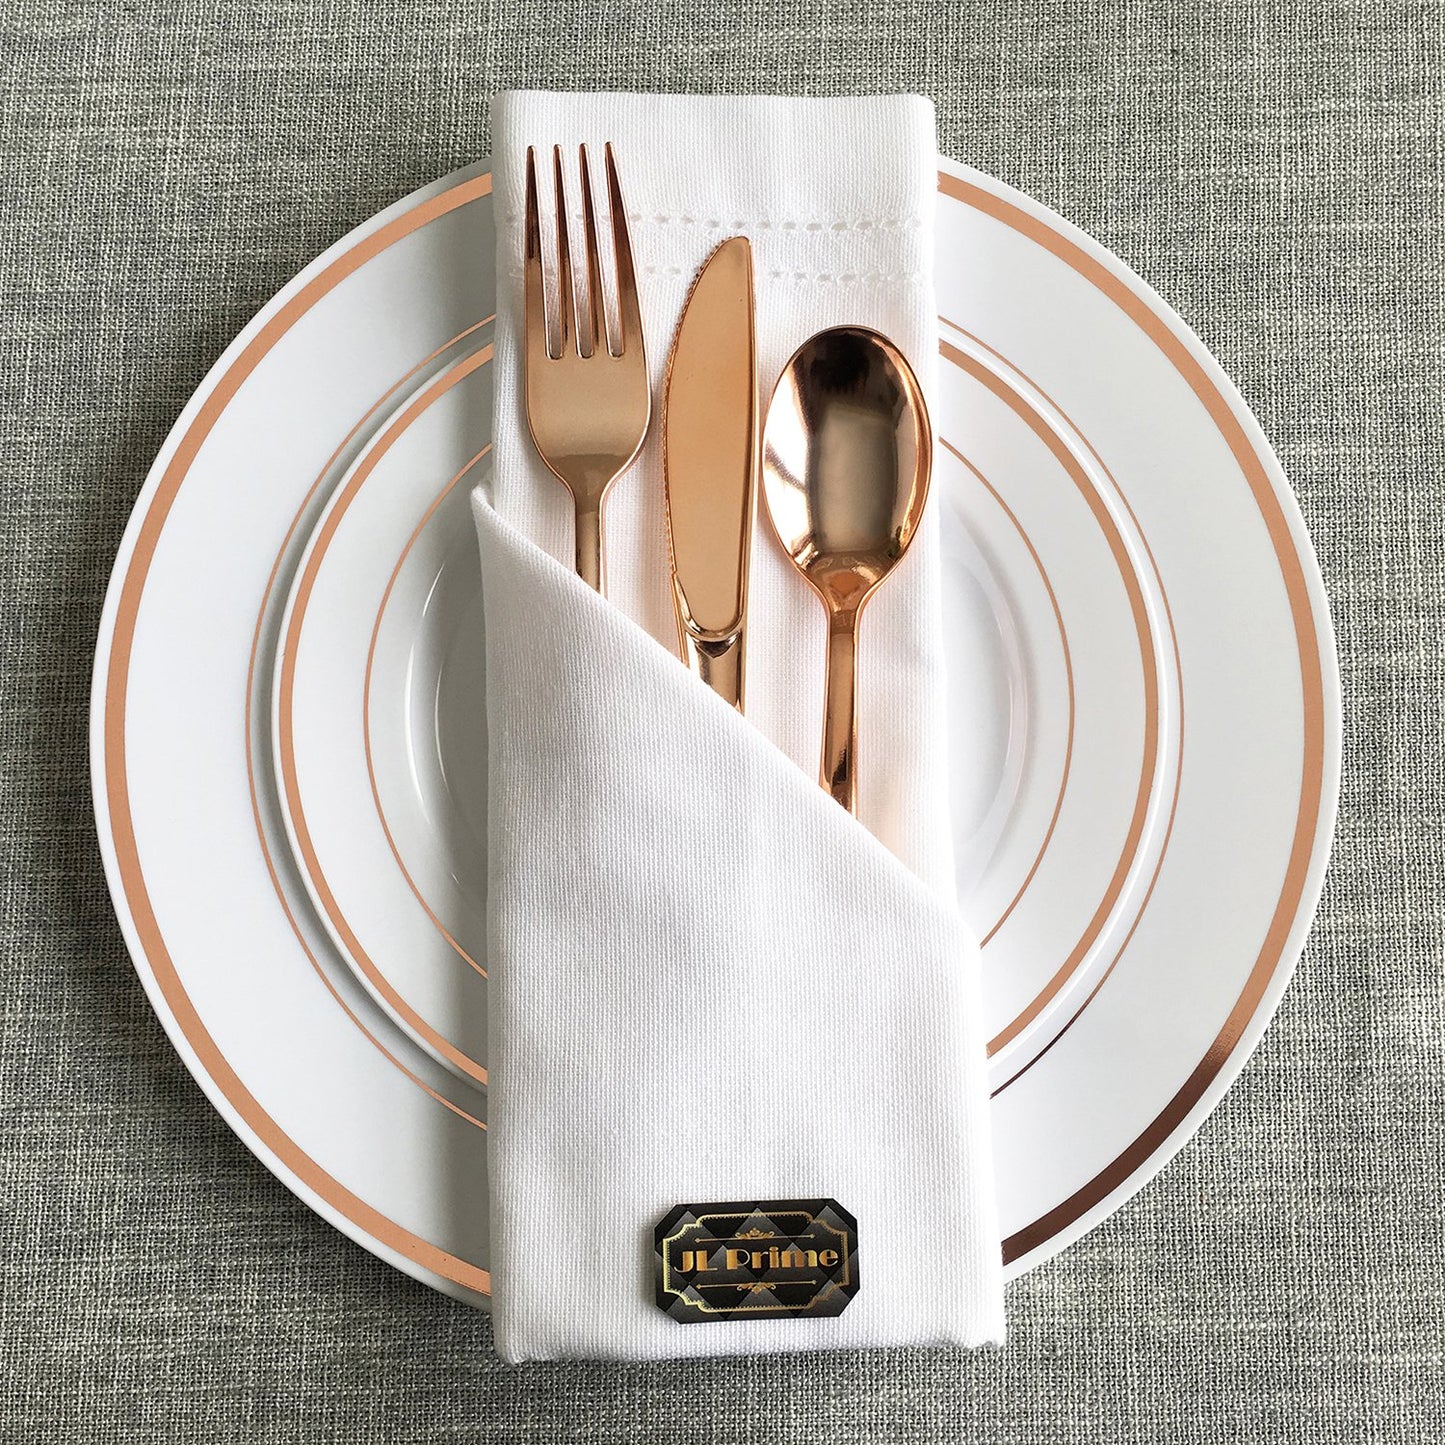 JL Prime 75 Rose Gold Plastic Silverware Set, Rose Gold Plastic Cutlery Set, Heavy Duty Utensils for Party & Wedding, Disposable Rose Gold Flatware, 25 Forks, 25 Spoons, 25 Knives